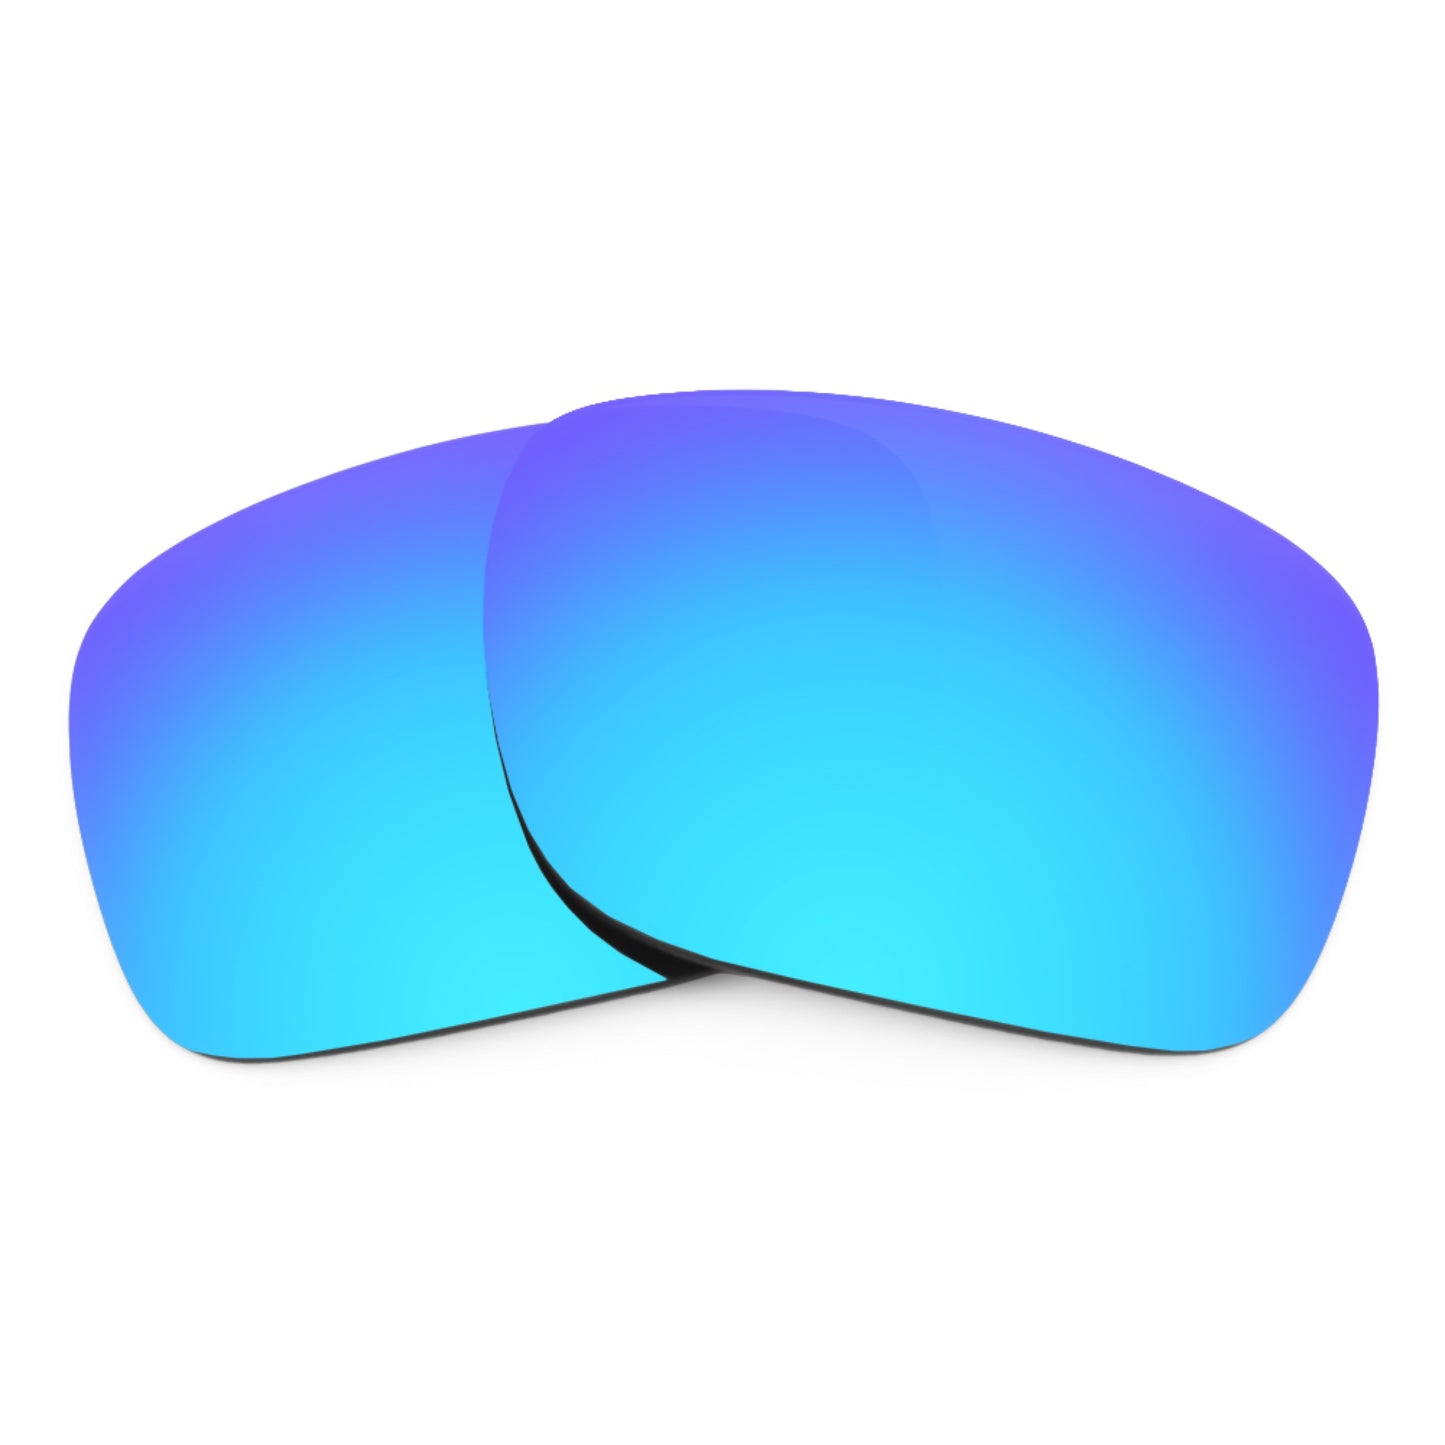 Revant replacement lenses for Oakley Sliver Stealth Polarized Ice Blue